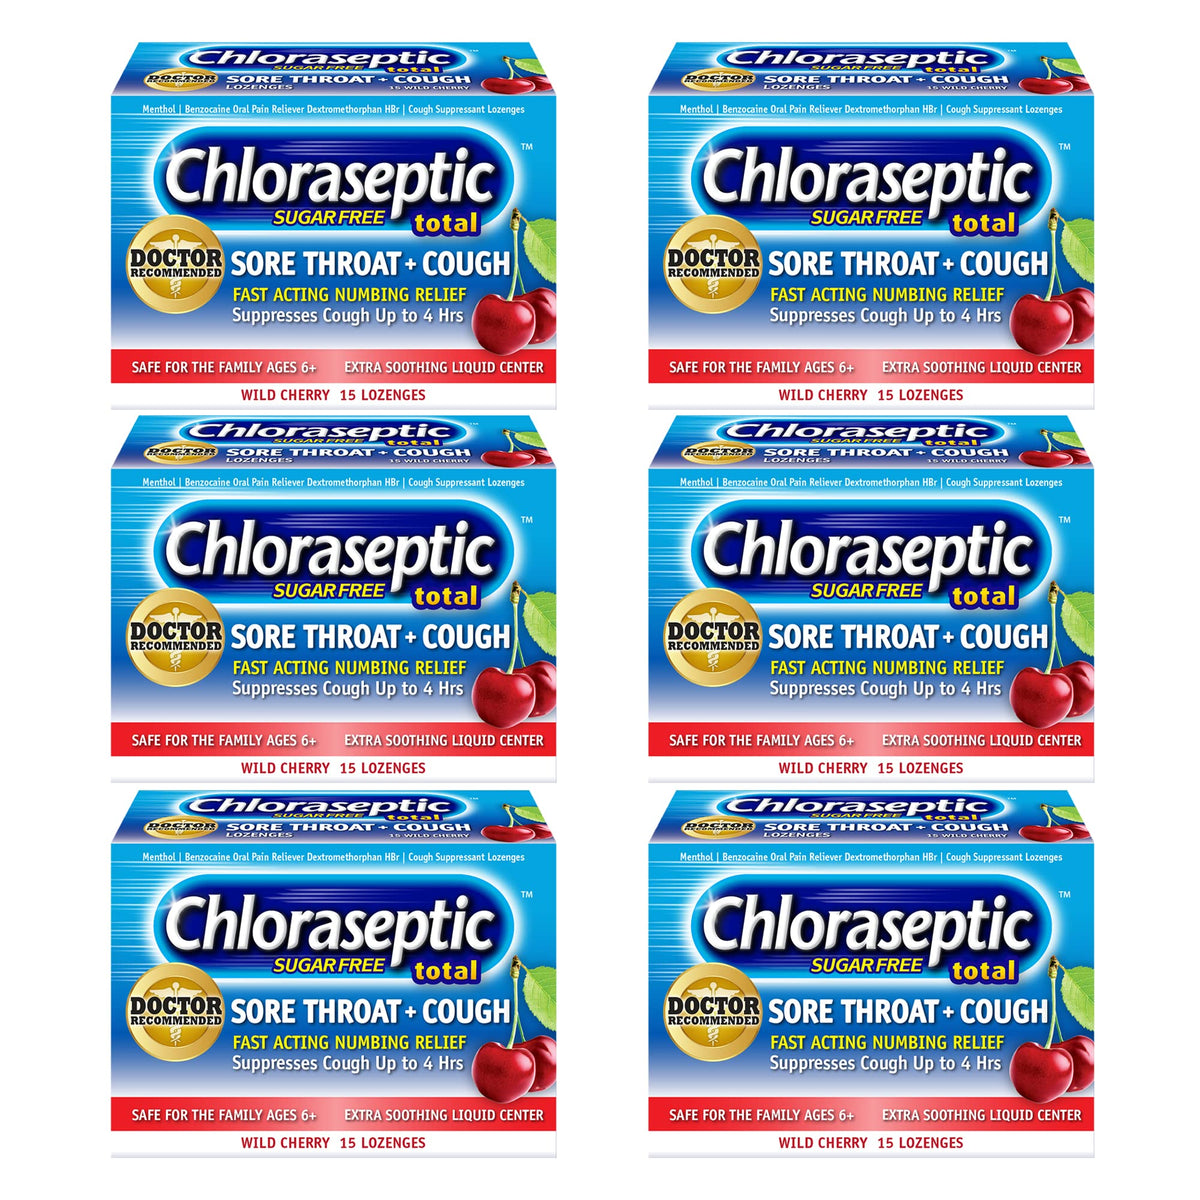 Chloraseptic Total Sore Throat + Cough Lozenges, Sugar-Free Wild Cherry Flavor, 15 CT, 6 Pack